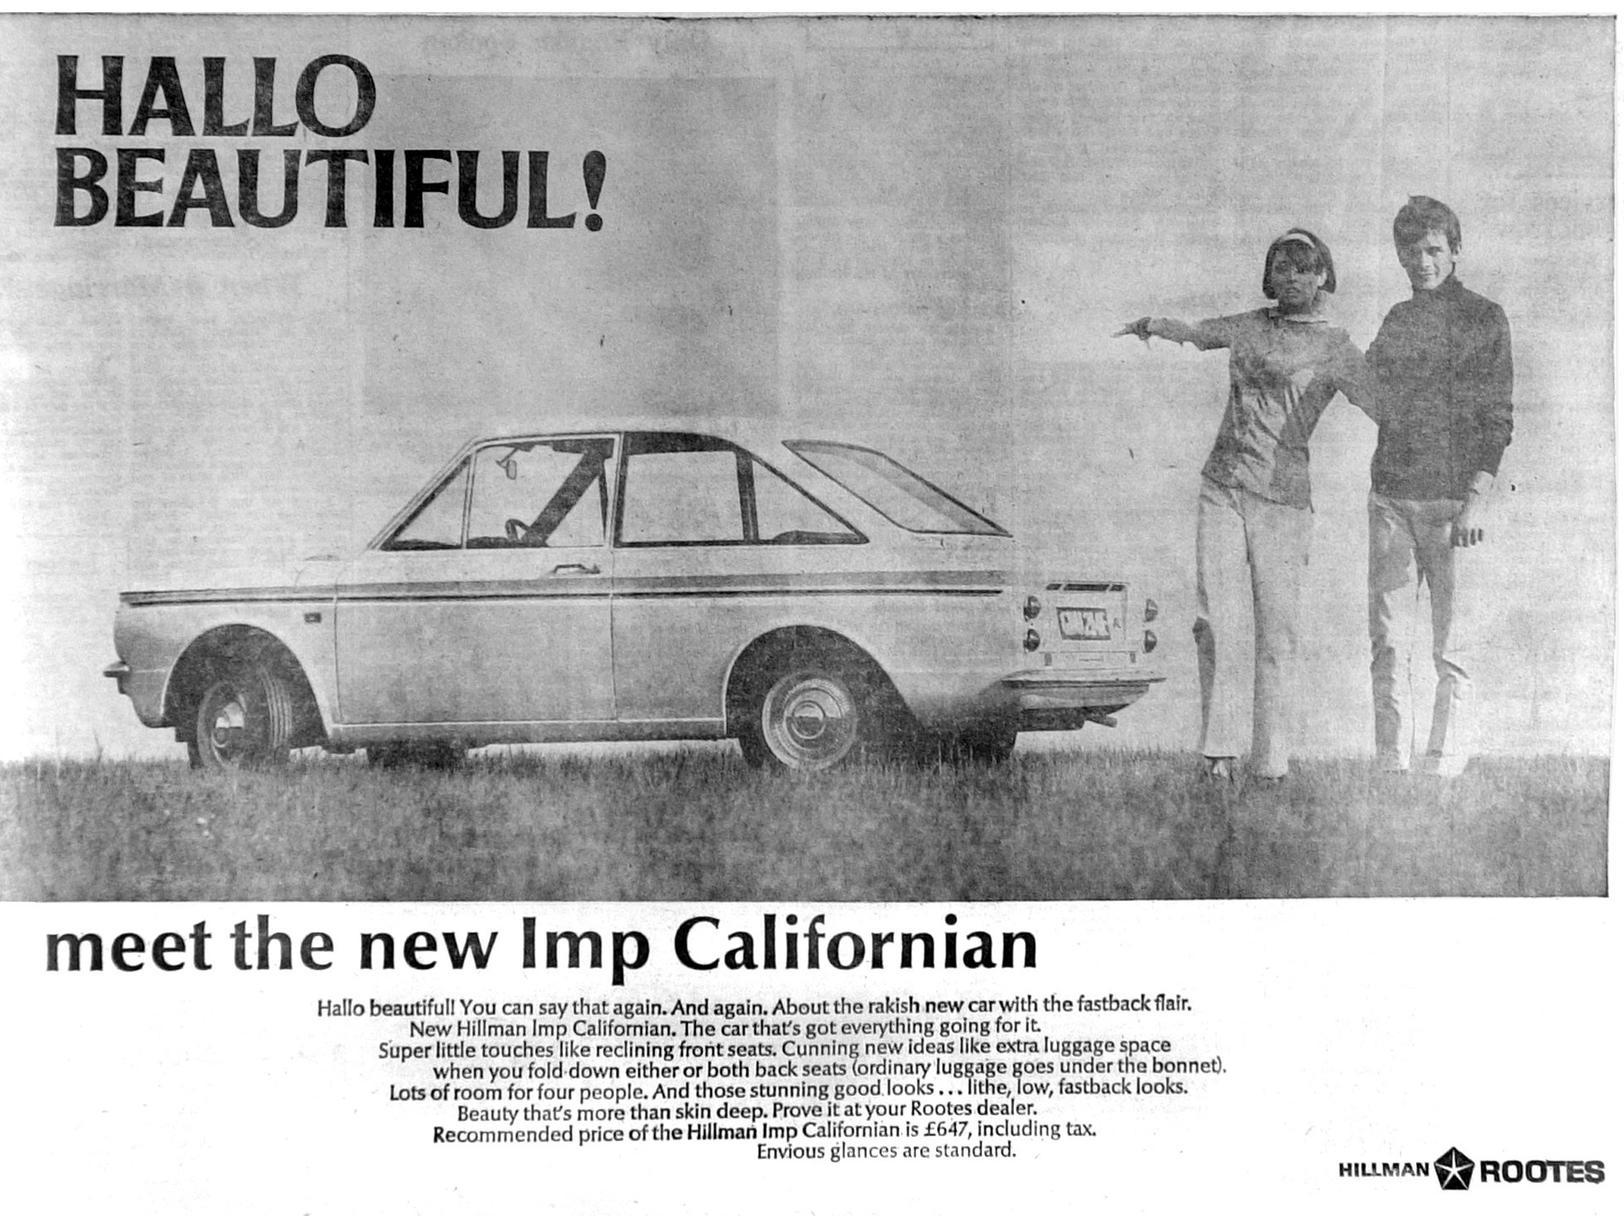 'Envious glances are standard' was the boast. Were you a fan of the new Imp Californian? It was available to buy from Rootes dealers.